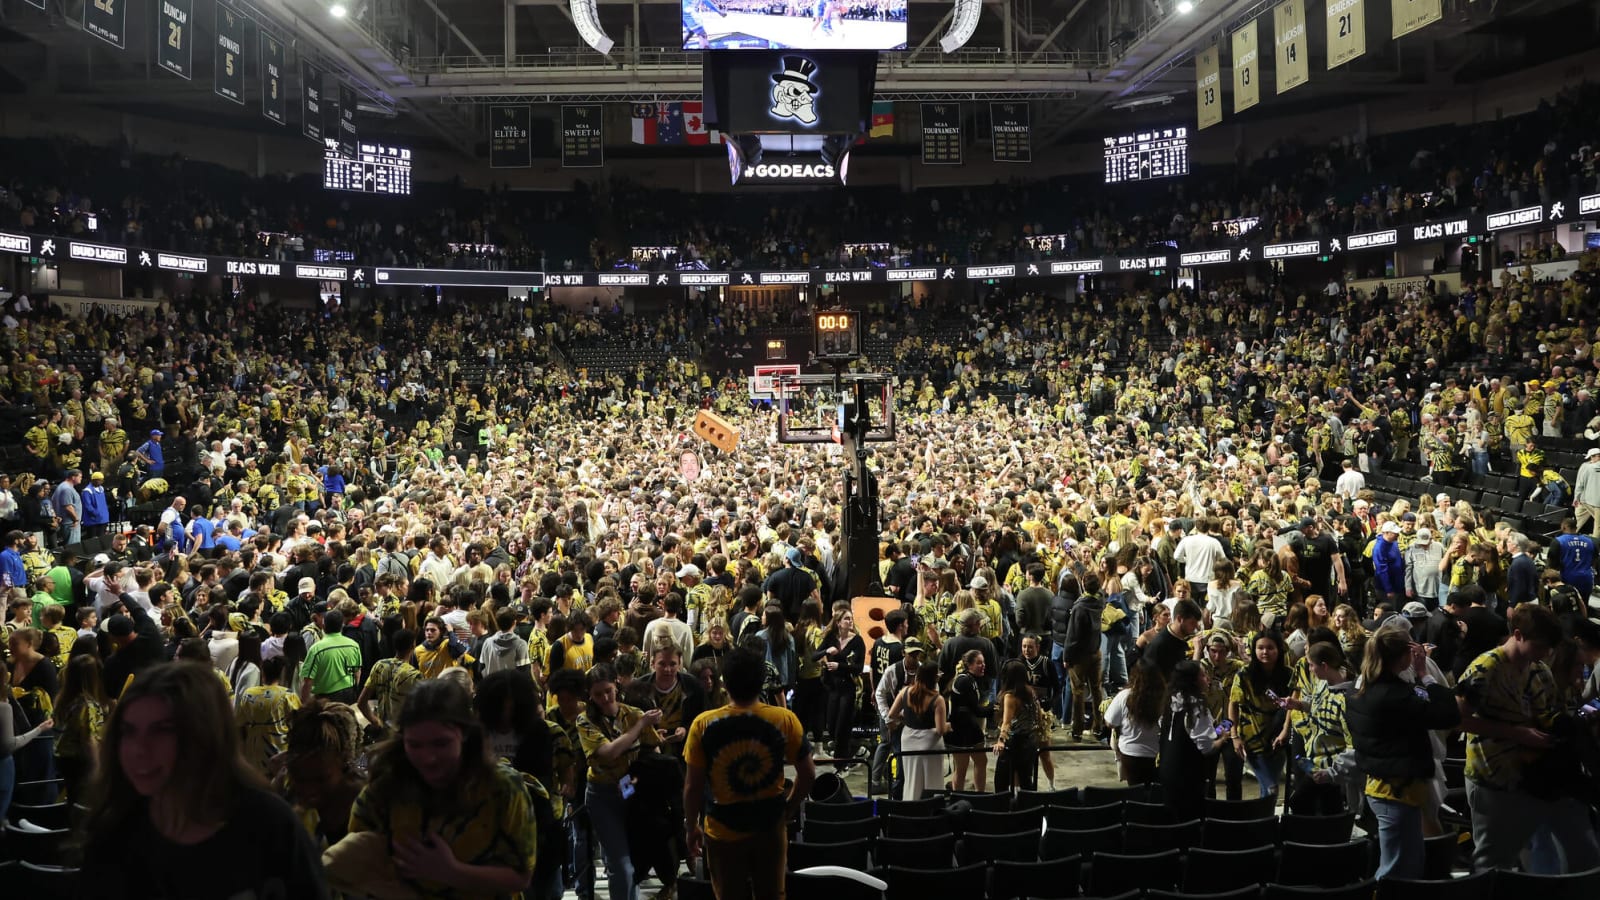 ESPN analyst says court storming could 'stop tomorrow'